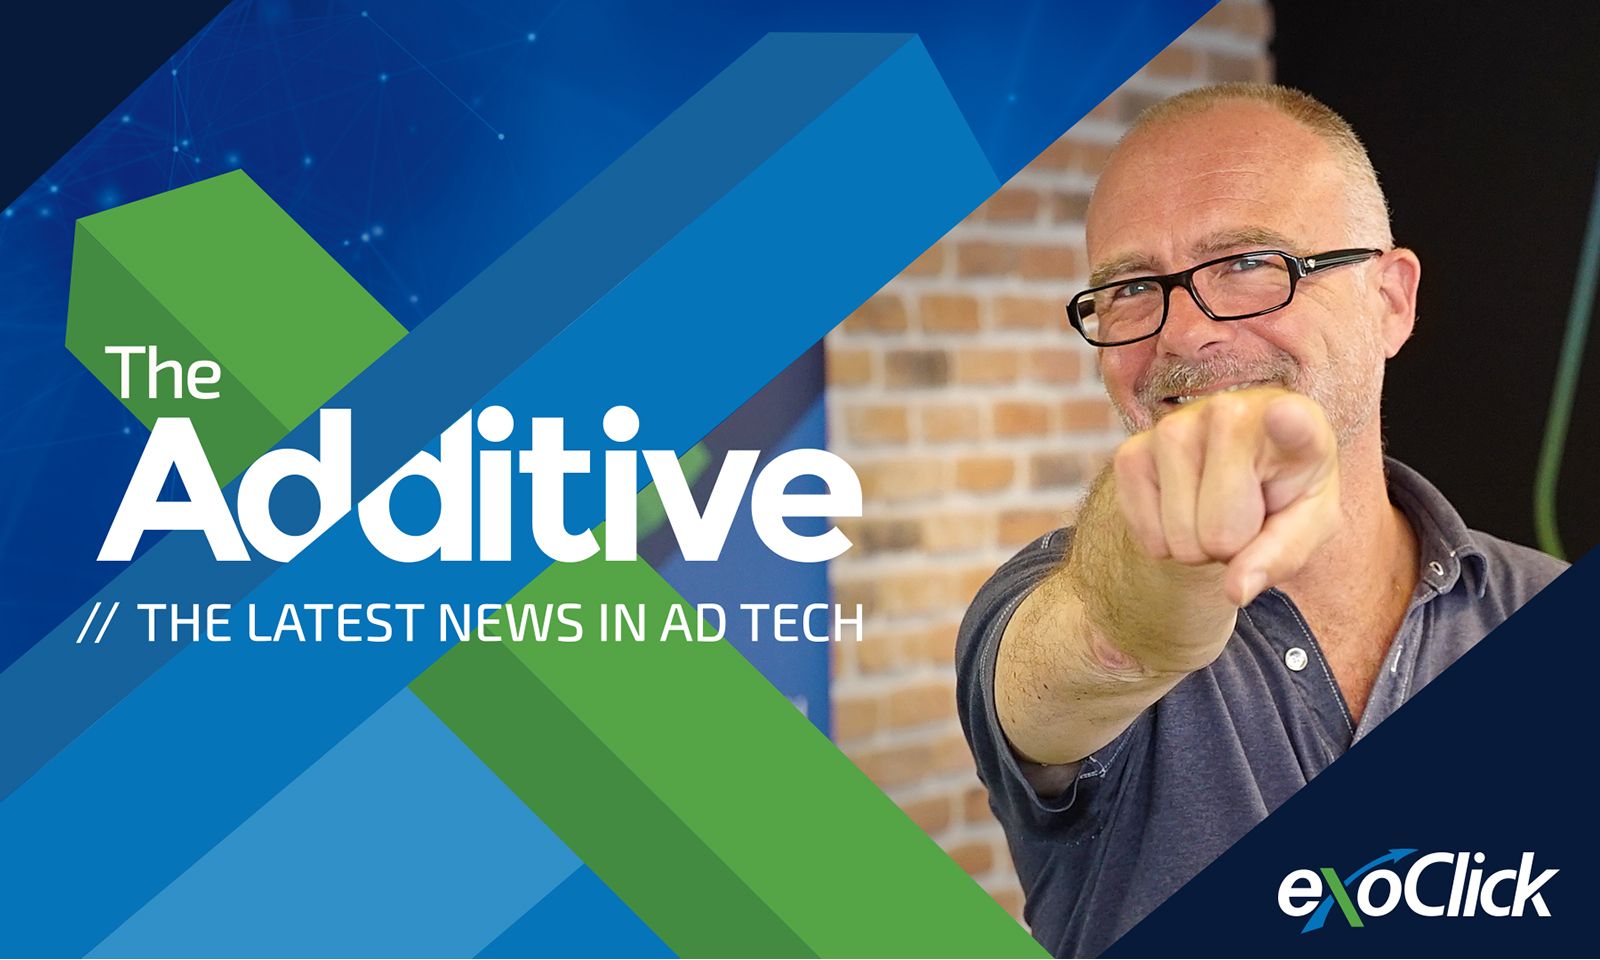 Ad Tech News Show 'The Additive' Now Has Dedicated Website